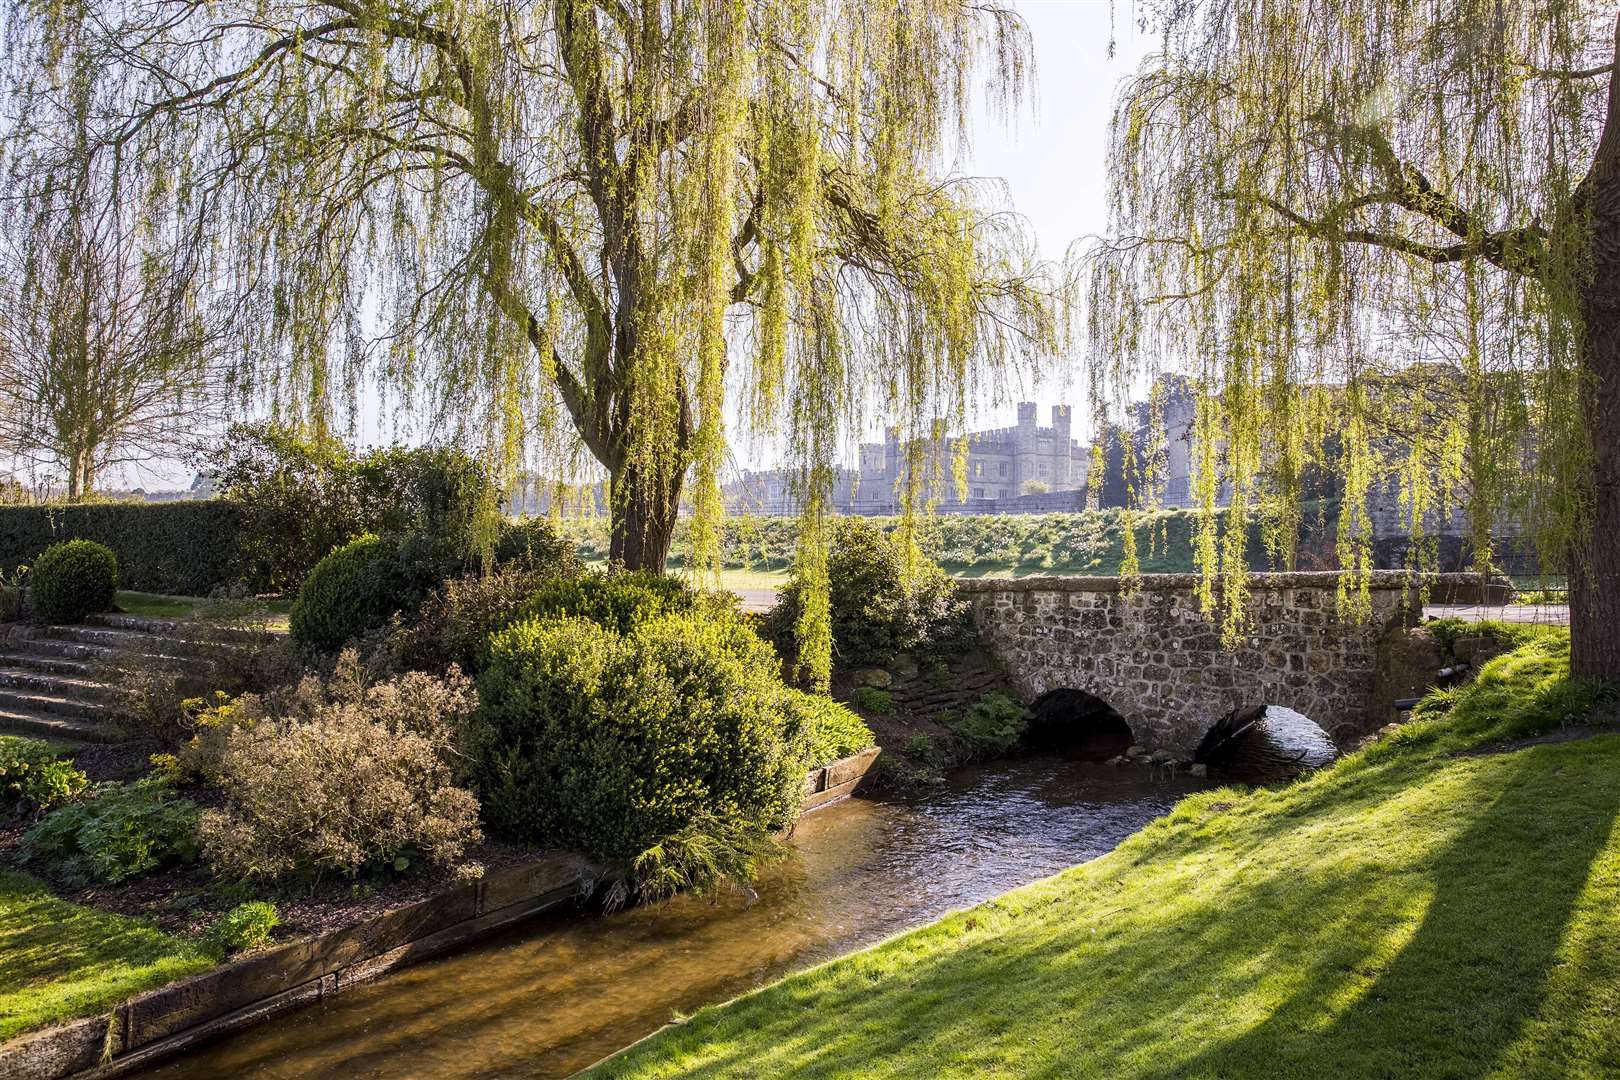 Gardens and grounds are open at Leeds Castle